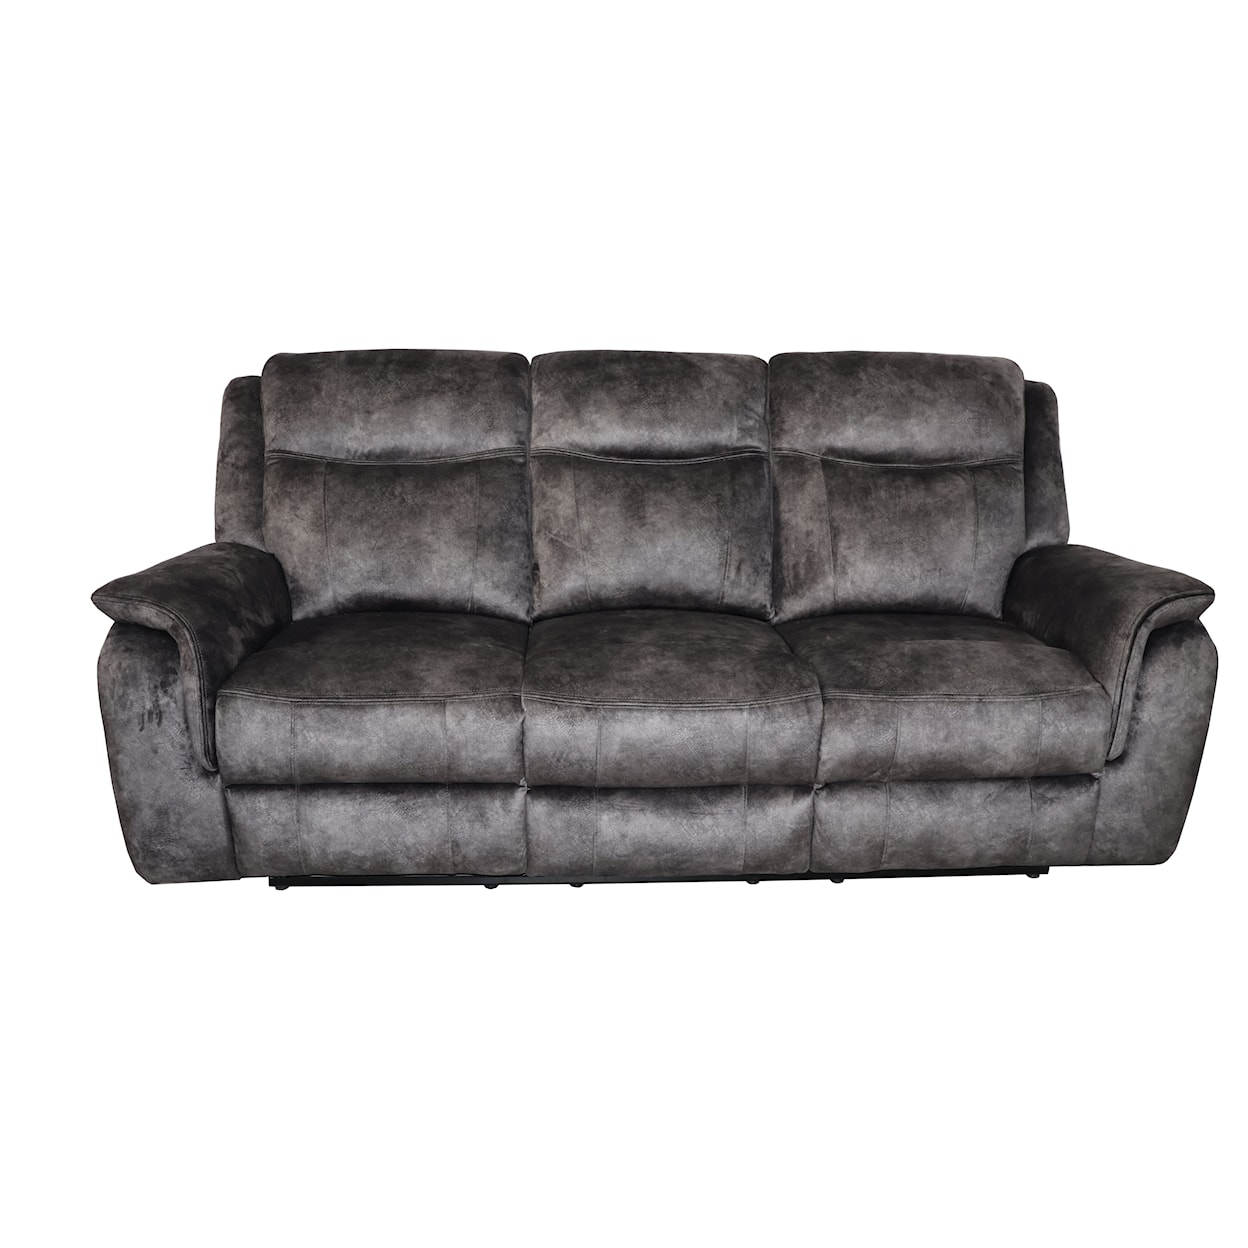 New Classic Furniture Park City Upholstered Dual Reclining Sofa